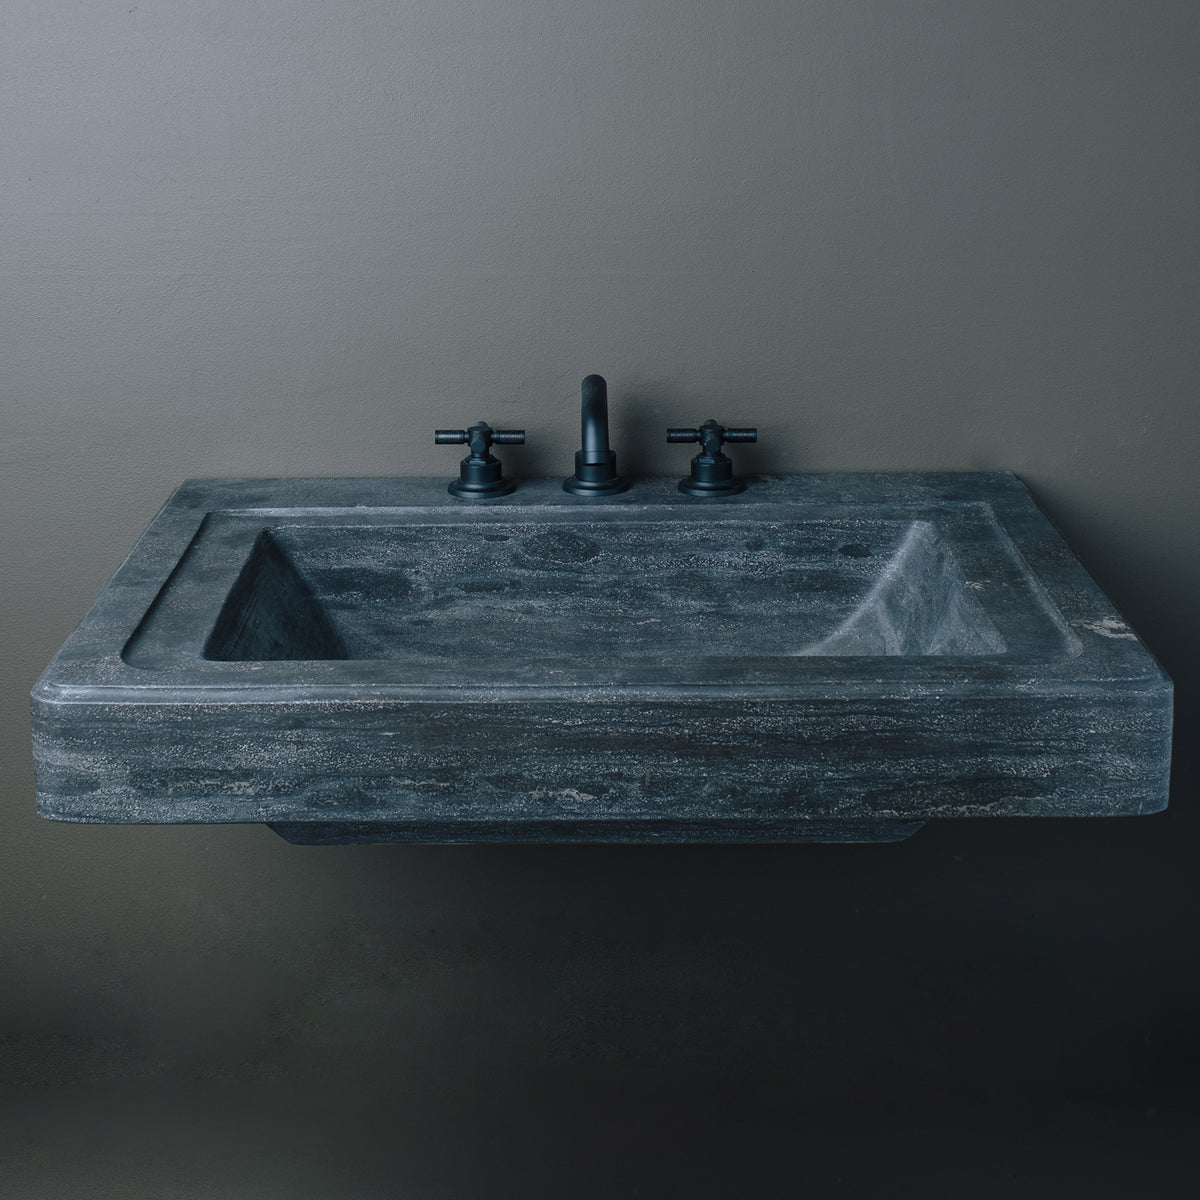 This Stone Forest Circa vanity sink is one-of-a-kind. It is carved from a single block of antique gray limestone and has a honed finish. image 2 of 3